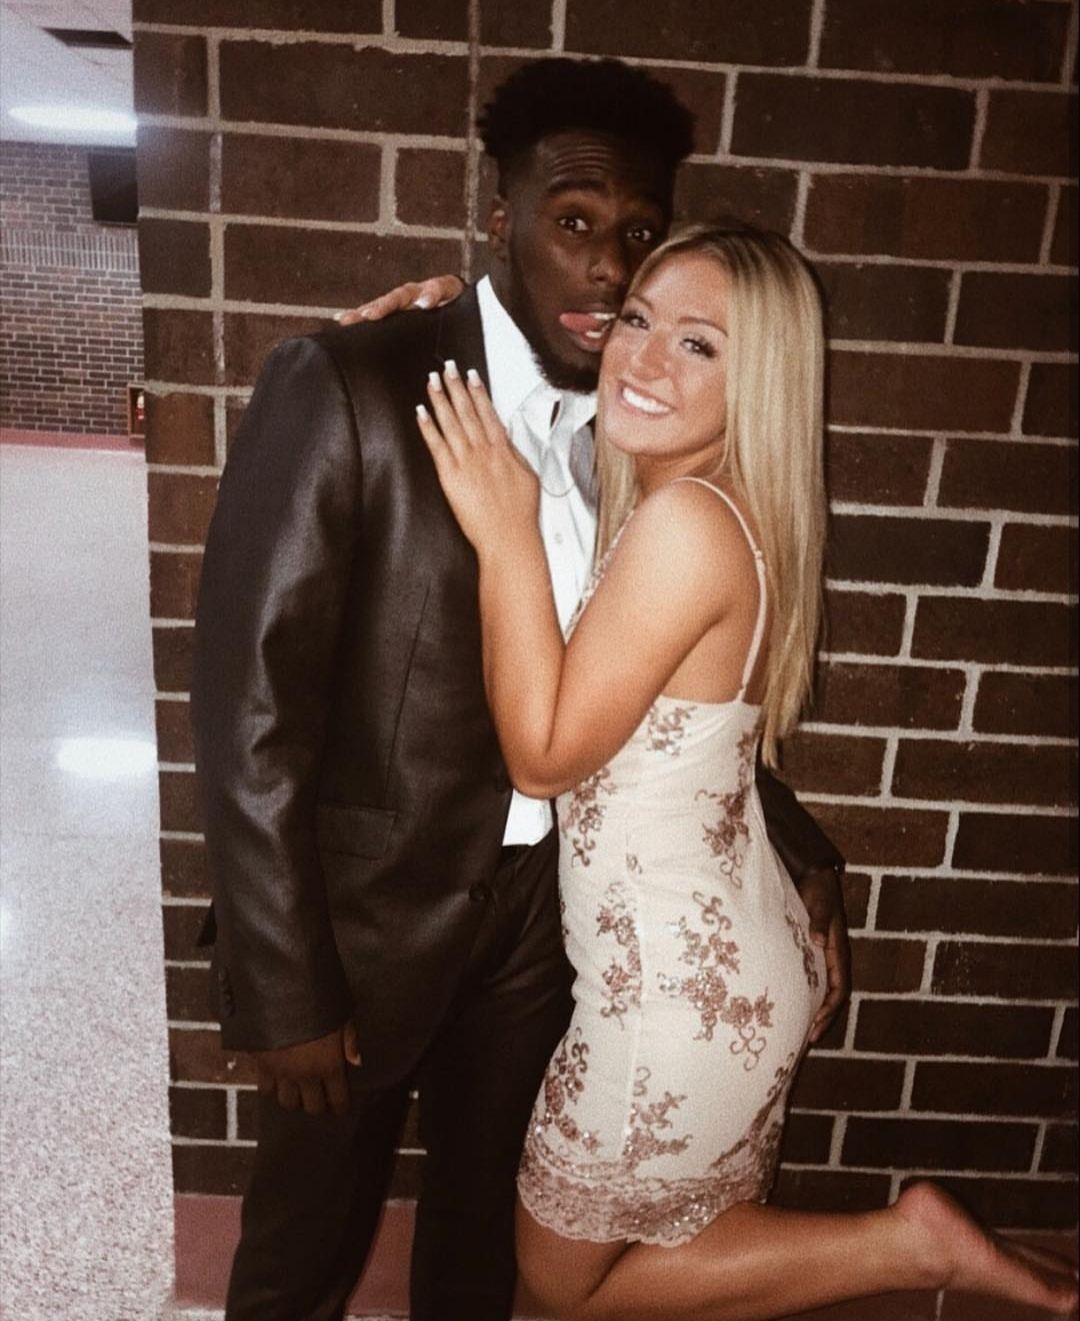 Prom Interracial Party Porn - She will get blacked after prom | Darkwanderer - Cuckold forums